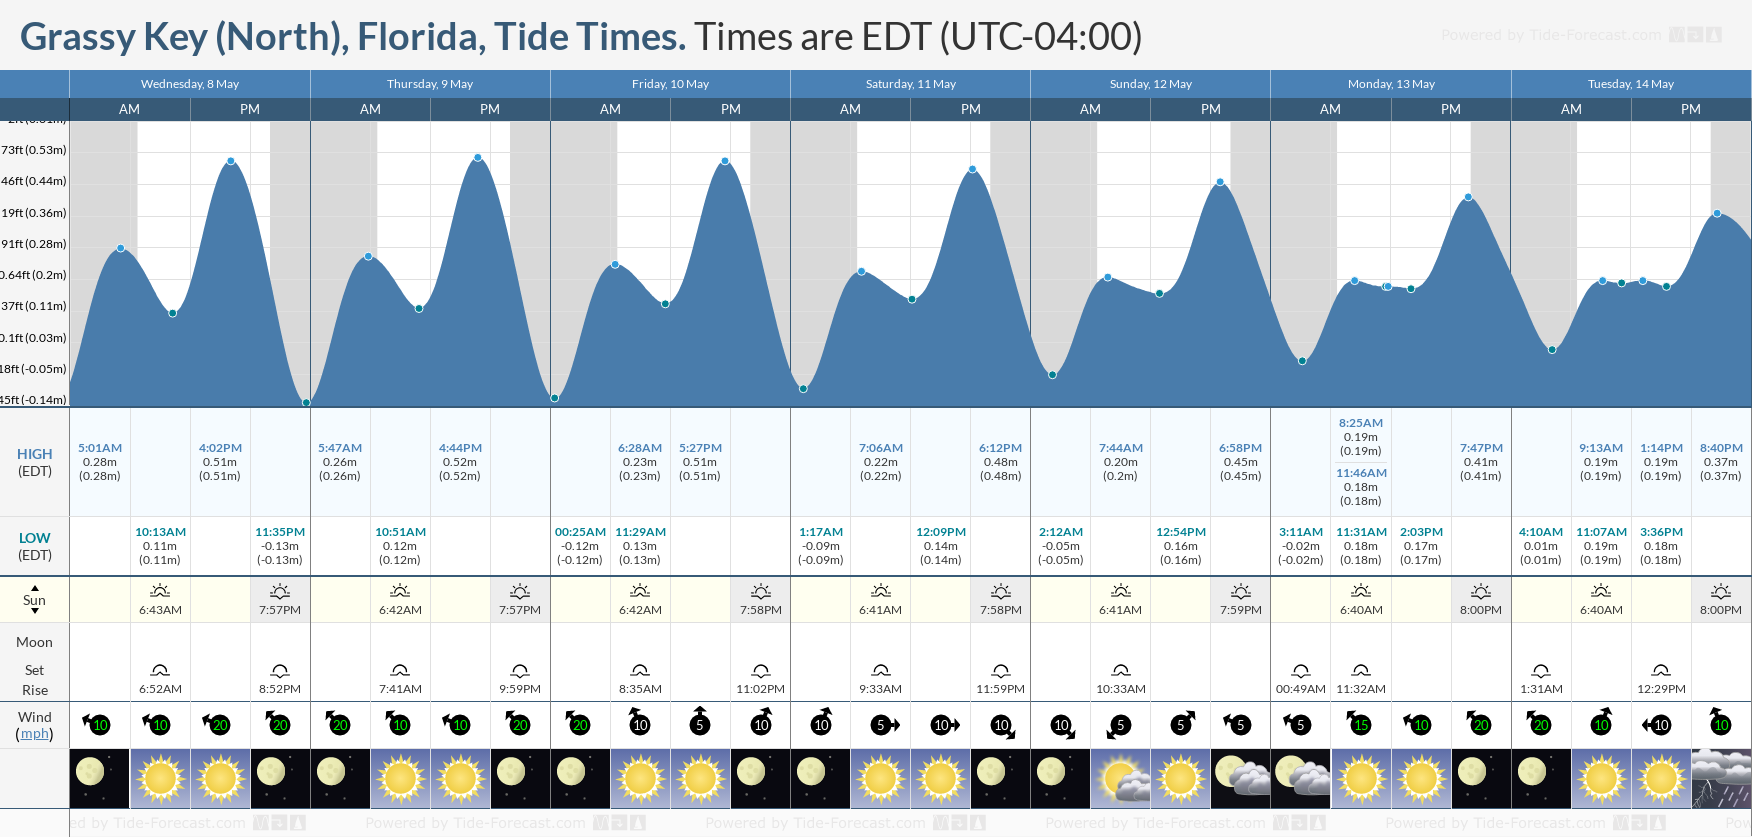 Grassy Key (North), Florida Tide Chart including high and low tide times for the next 7 days